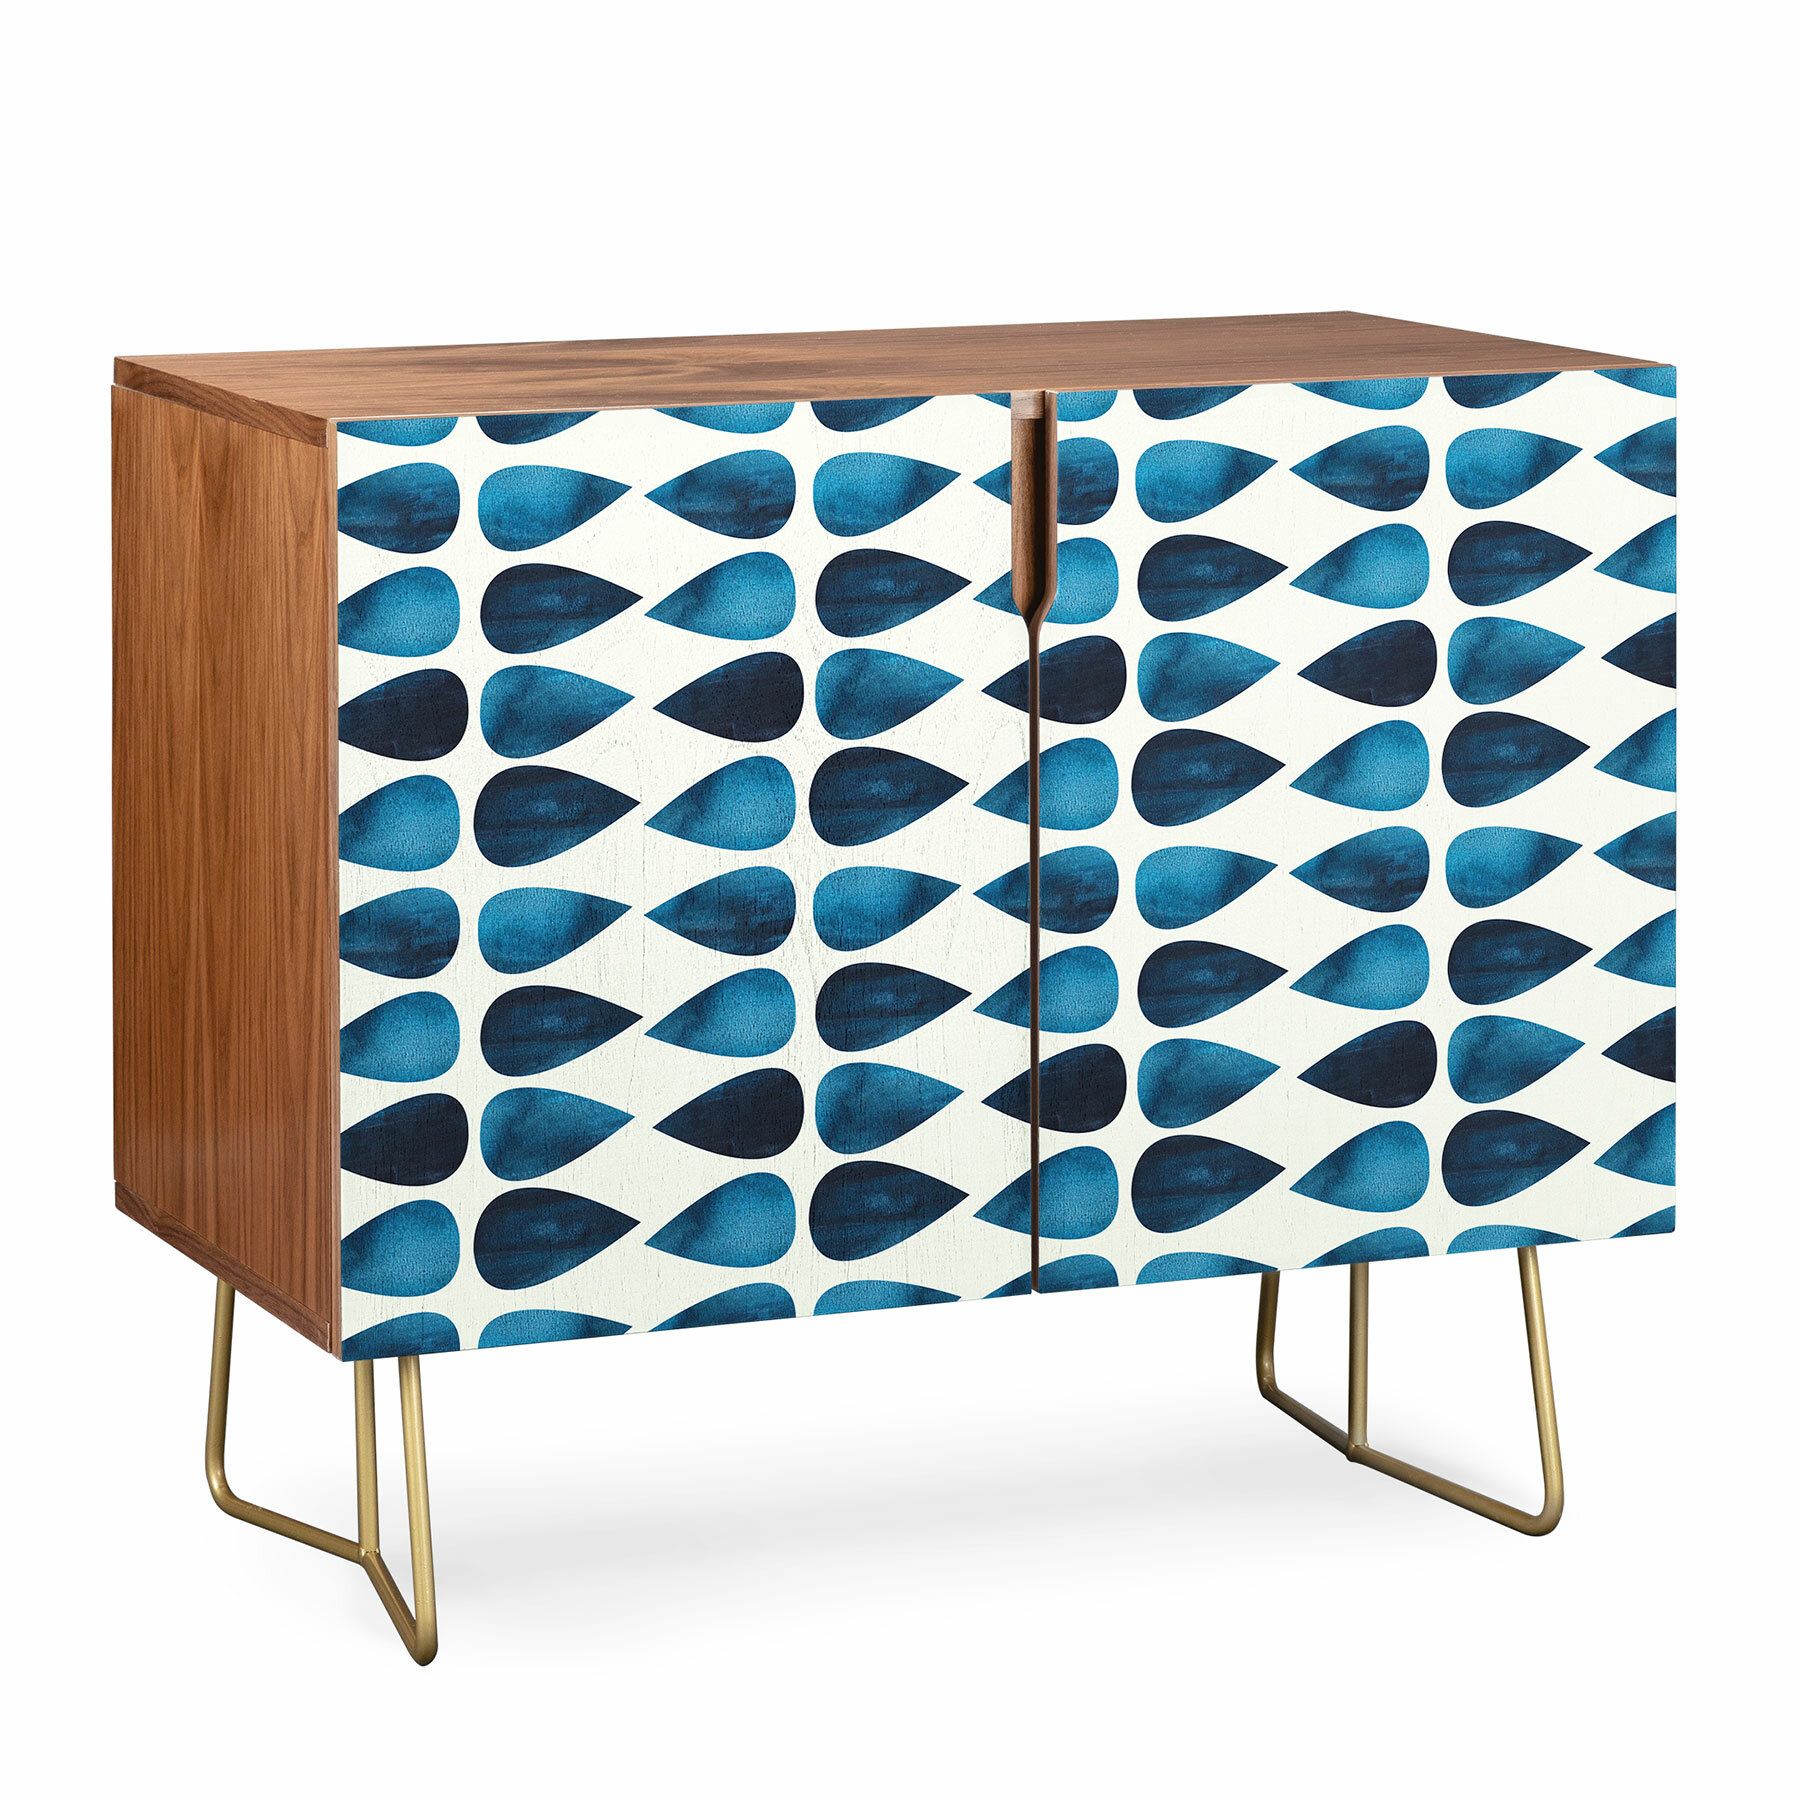 Modern East Urban Home Sideboards + Buffets | Allmodern For Modele 7 Geometric Credenzas (View 15 of 30)